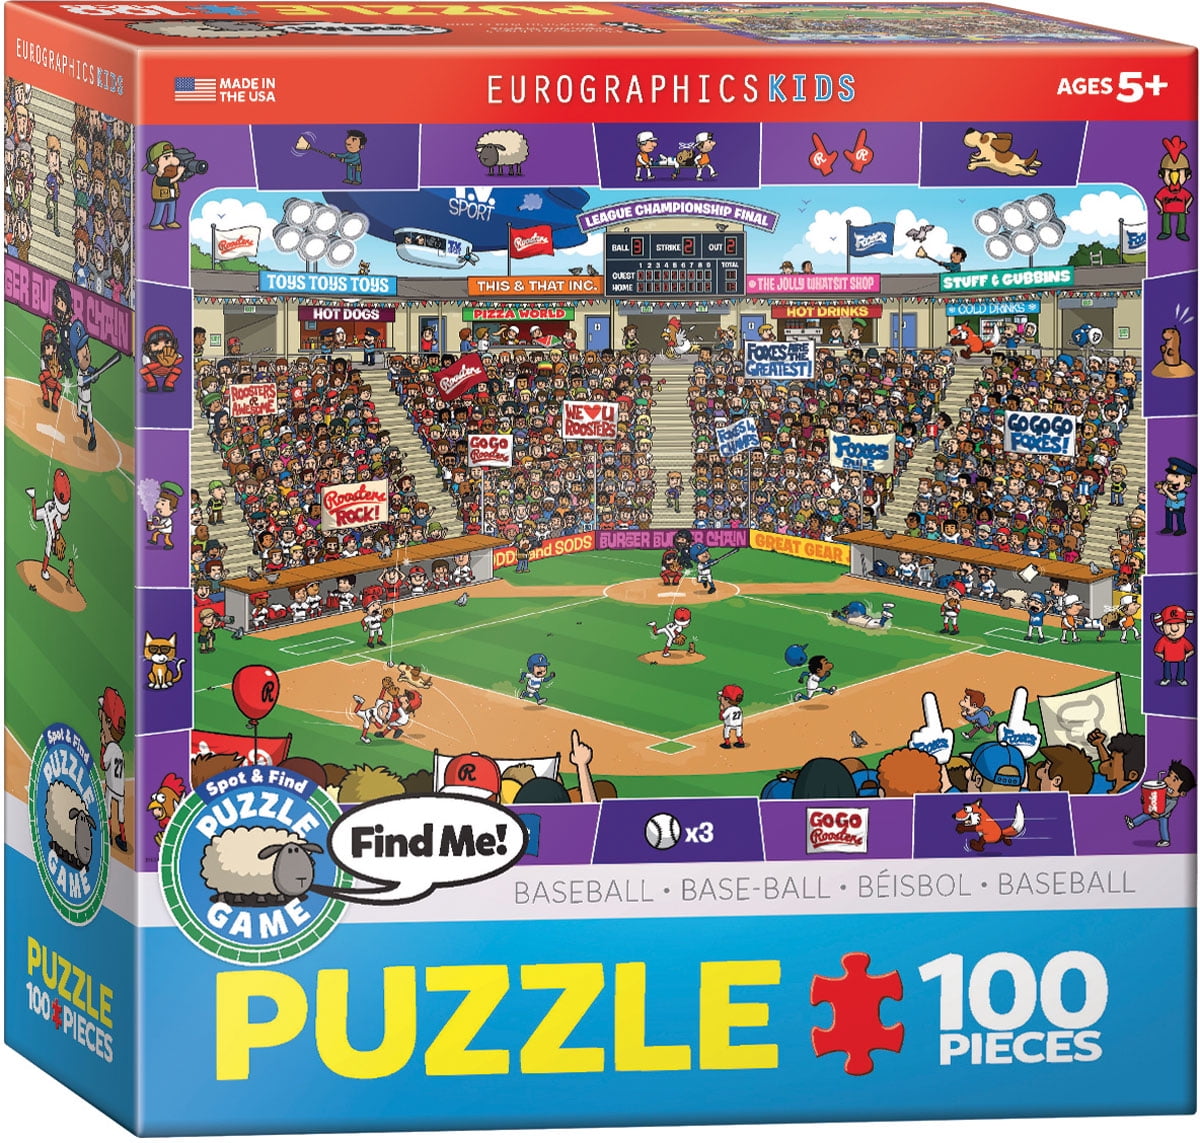 EUC Americas Story Baseball Stadiums of America Sport Jigsaw Puzzle 550 PC 2010 for sale online 